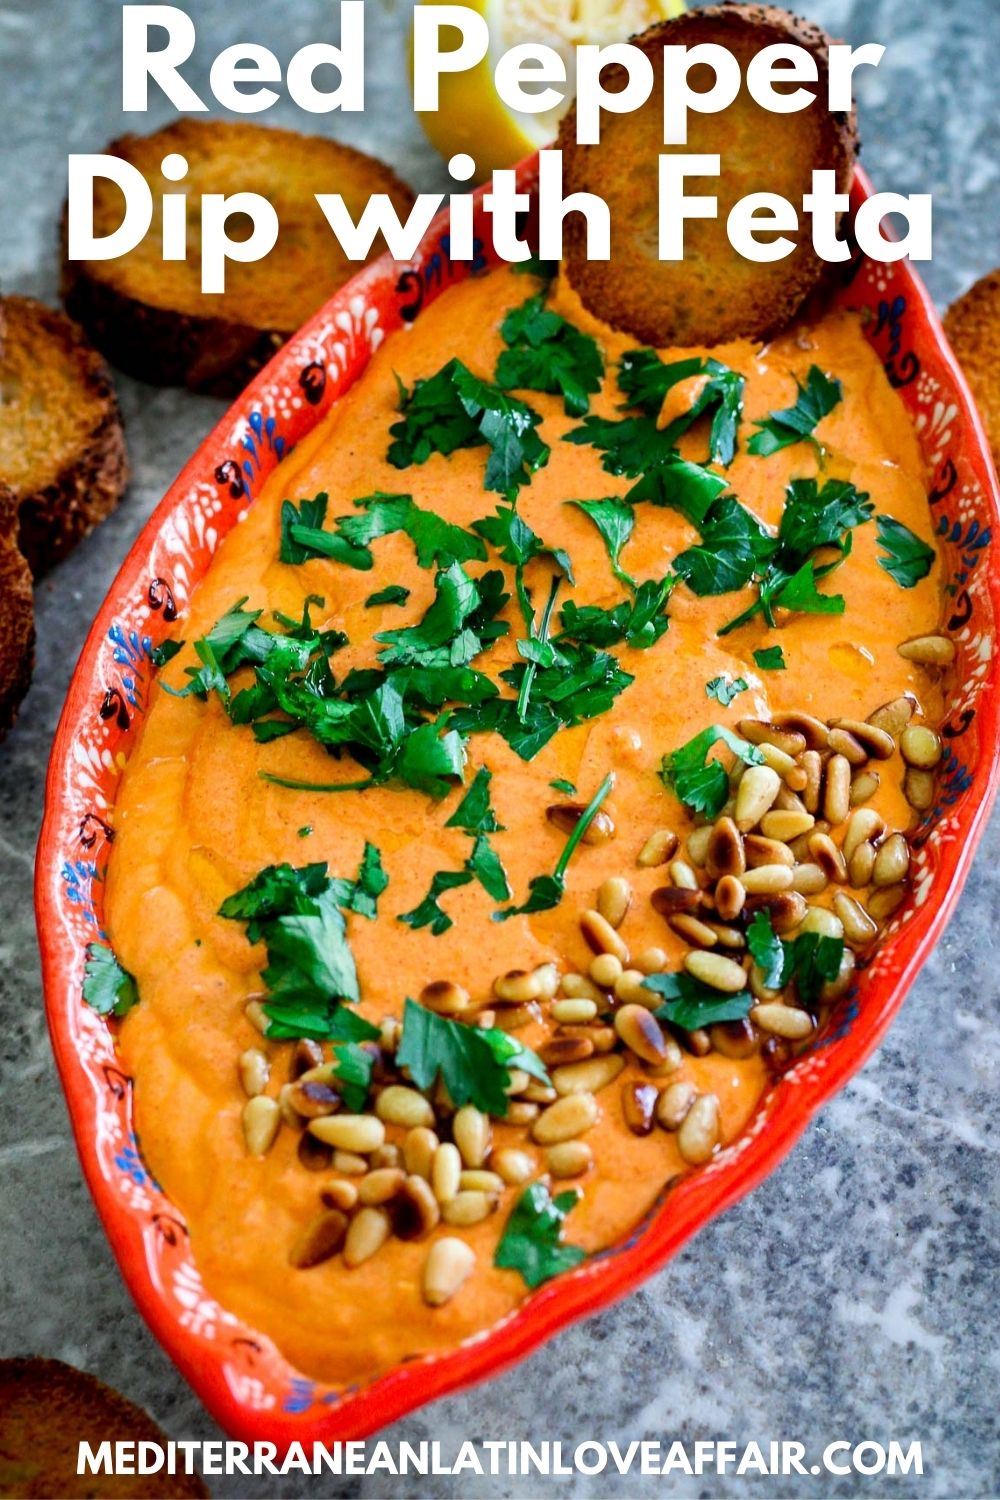 An image prepared specifically for Pinterest. It shows a big picture of the red pepper dip on a platter, garnished with parsley and pine nuts. On top of the image there's a title bar and on the bottom the website link. #mediterraneanlatinloveaffair